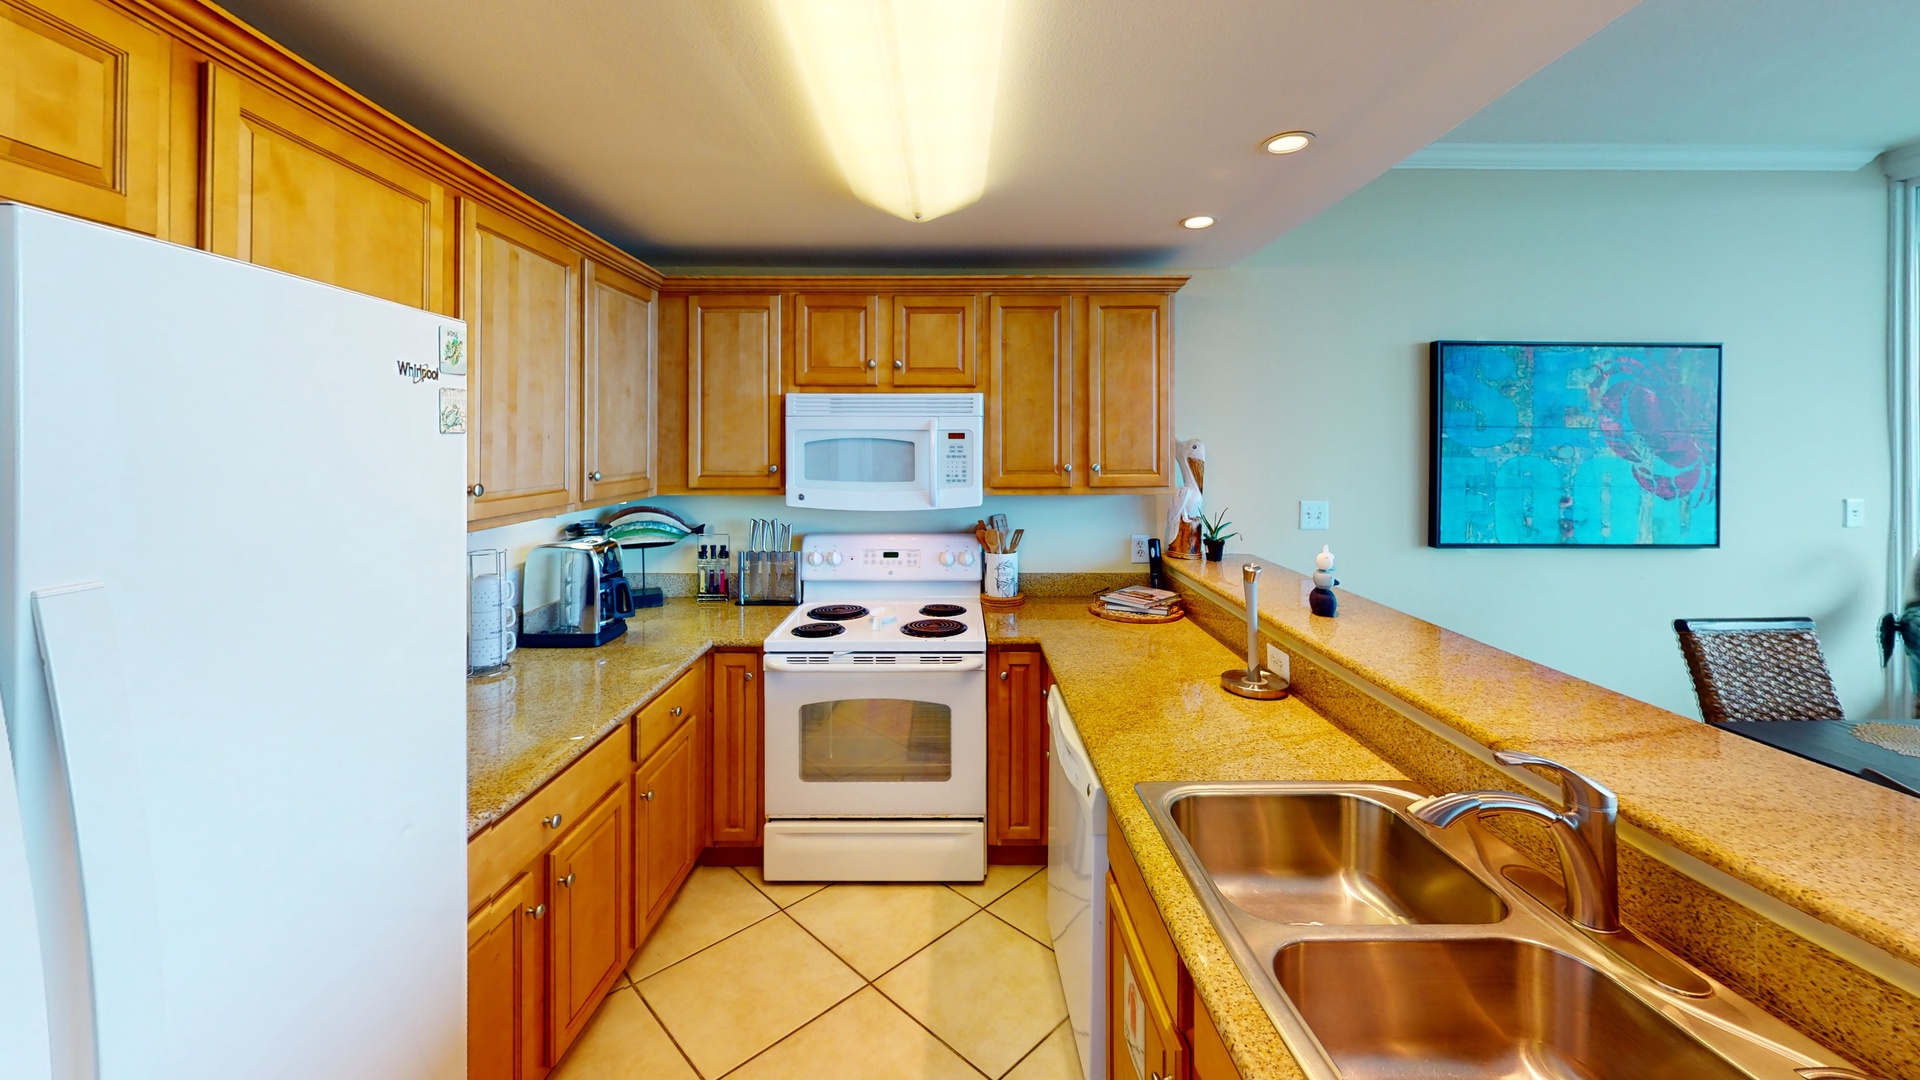 Fully equipped galley kitchen